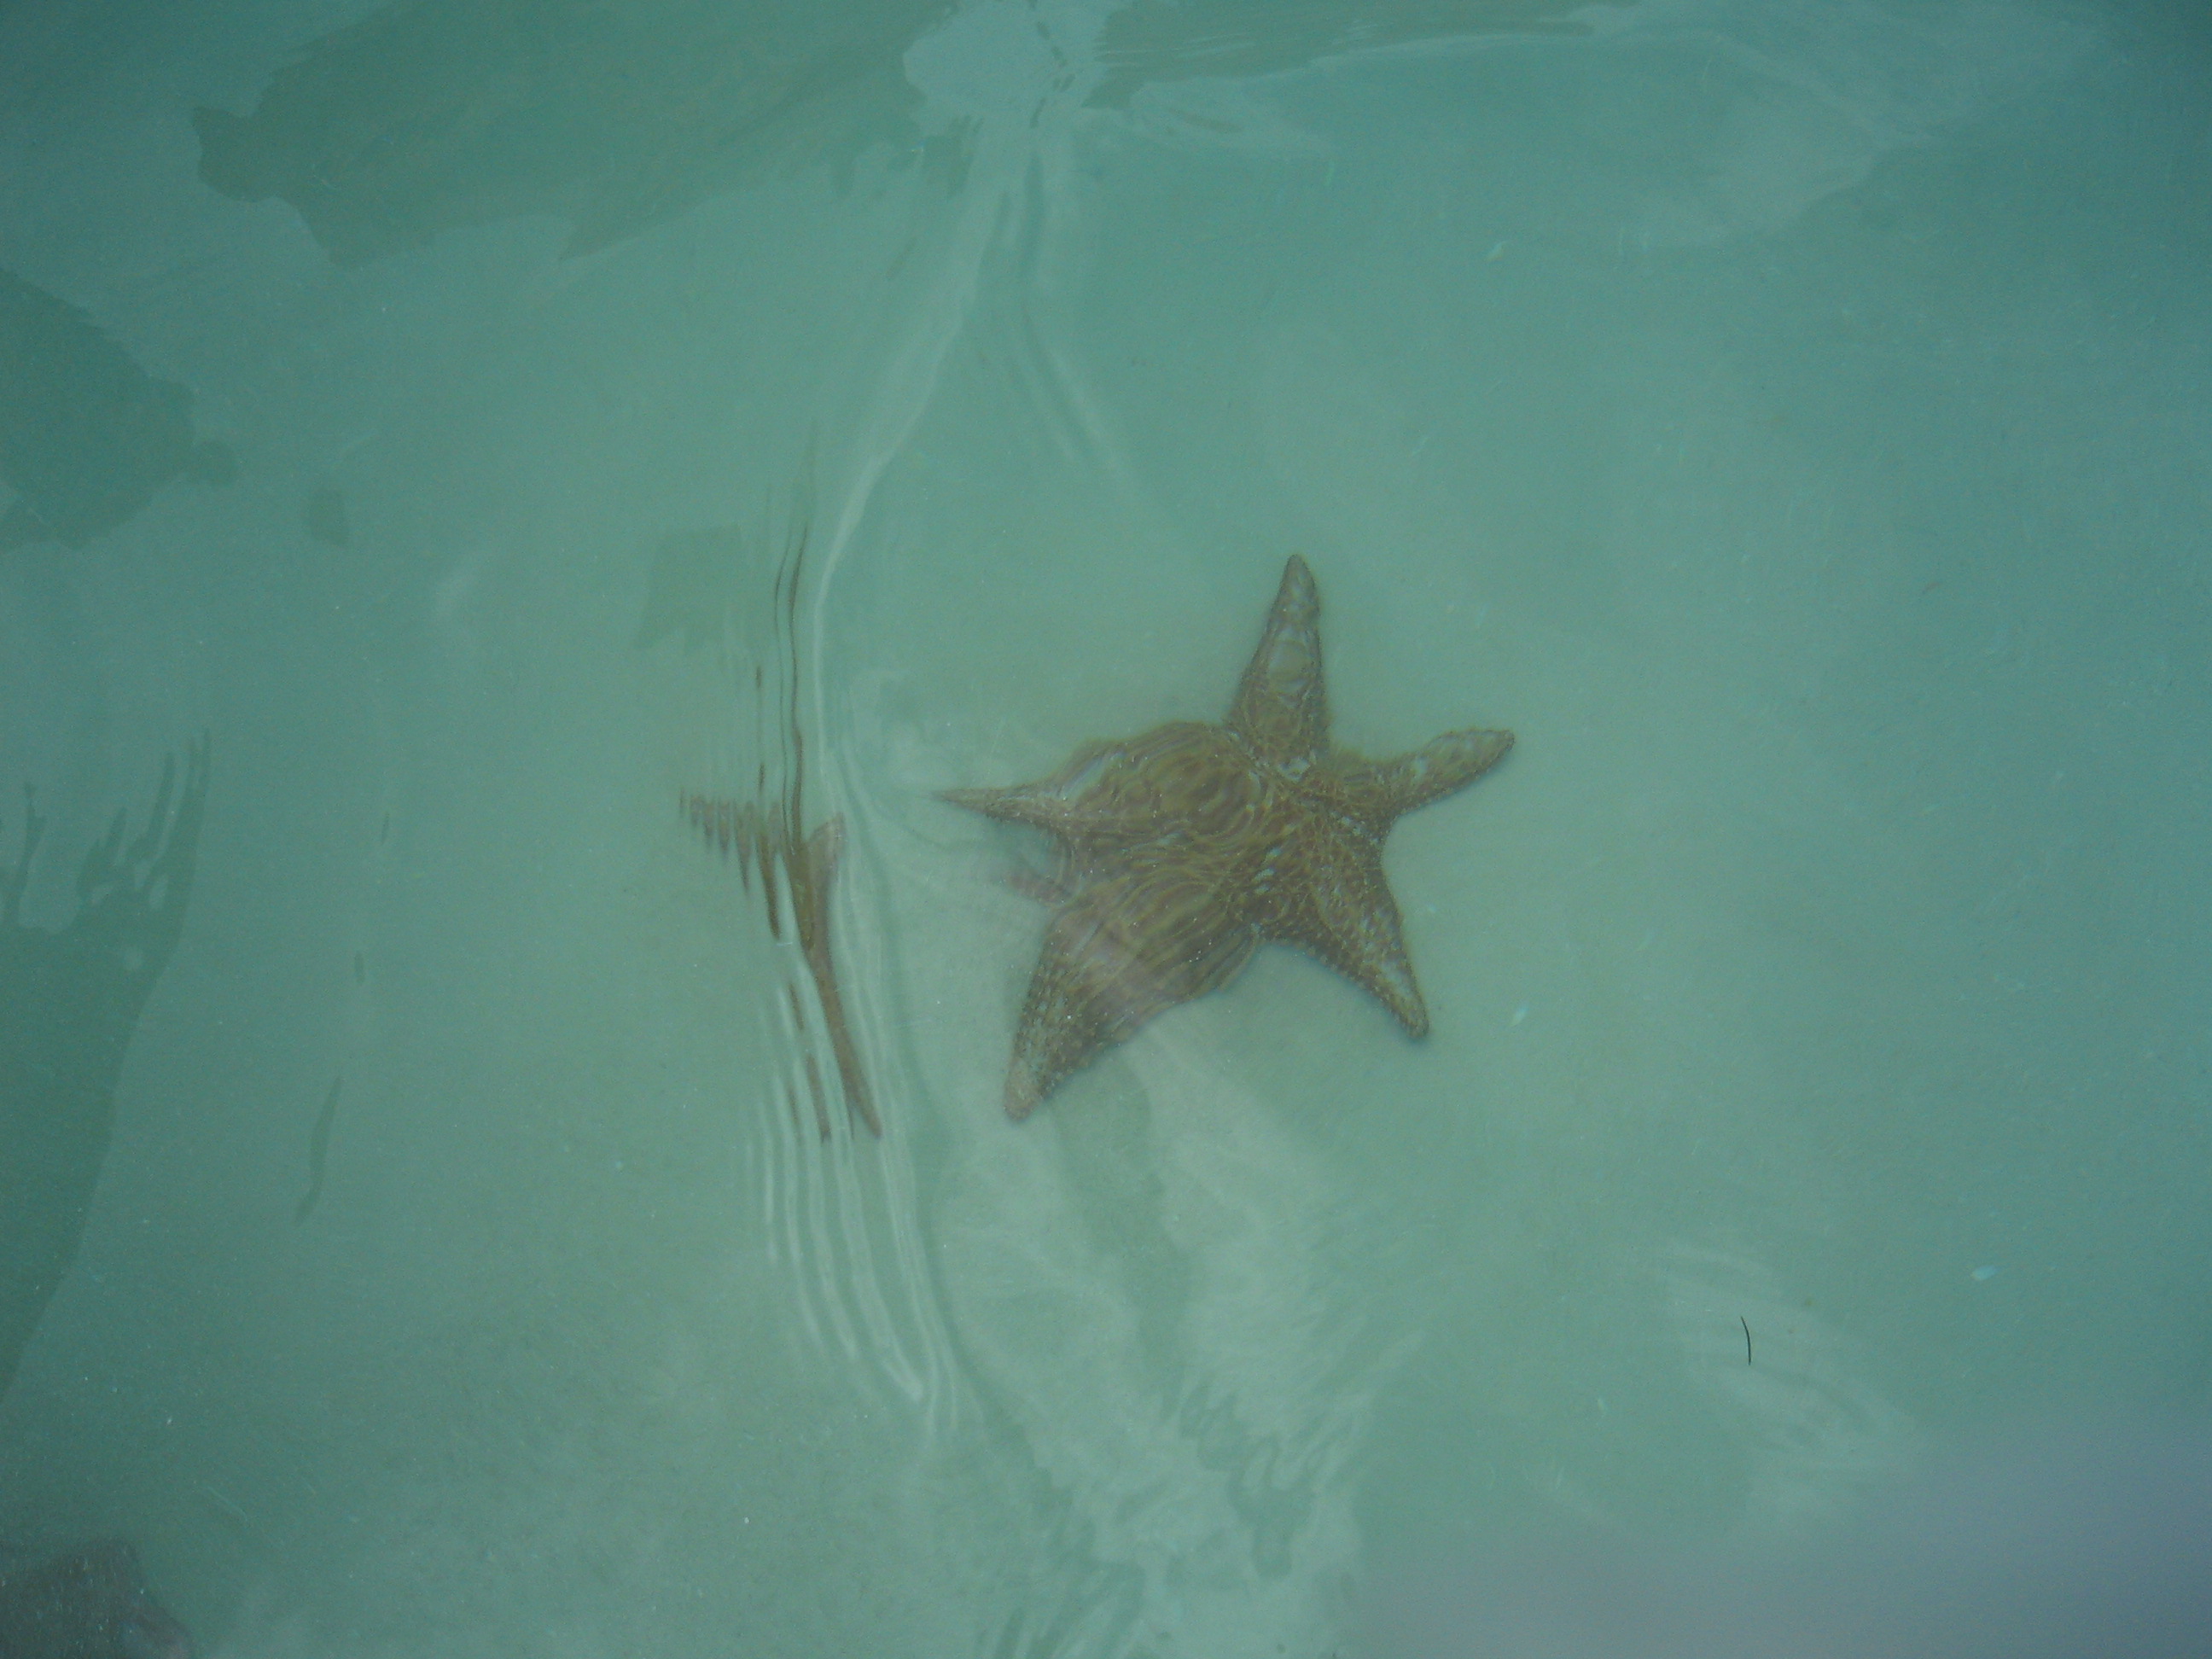 Starfish in the natural swimming pool